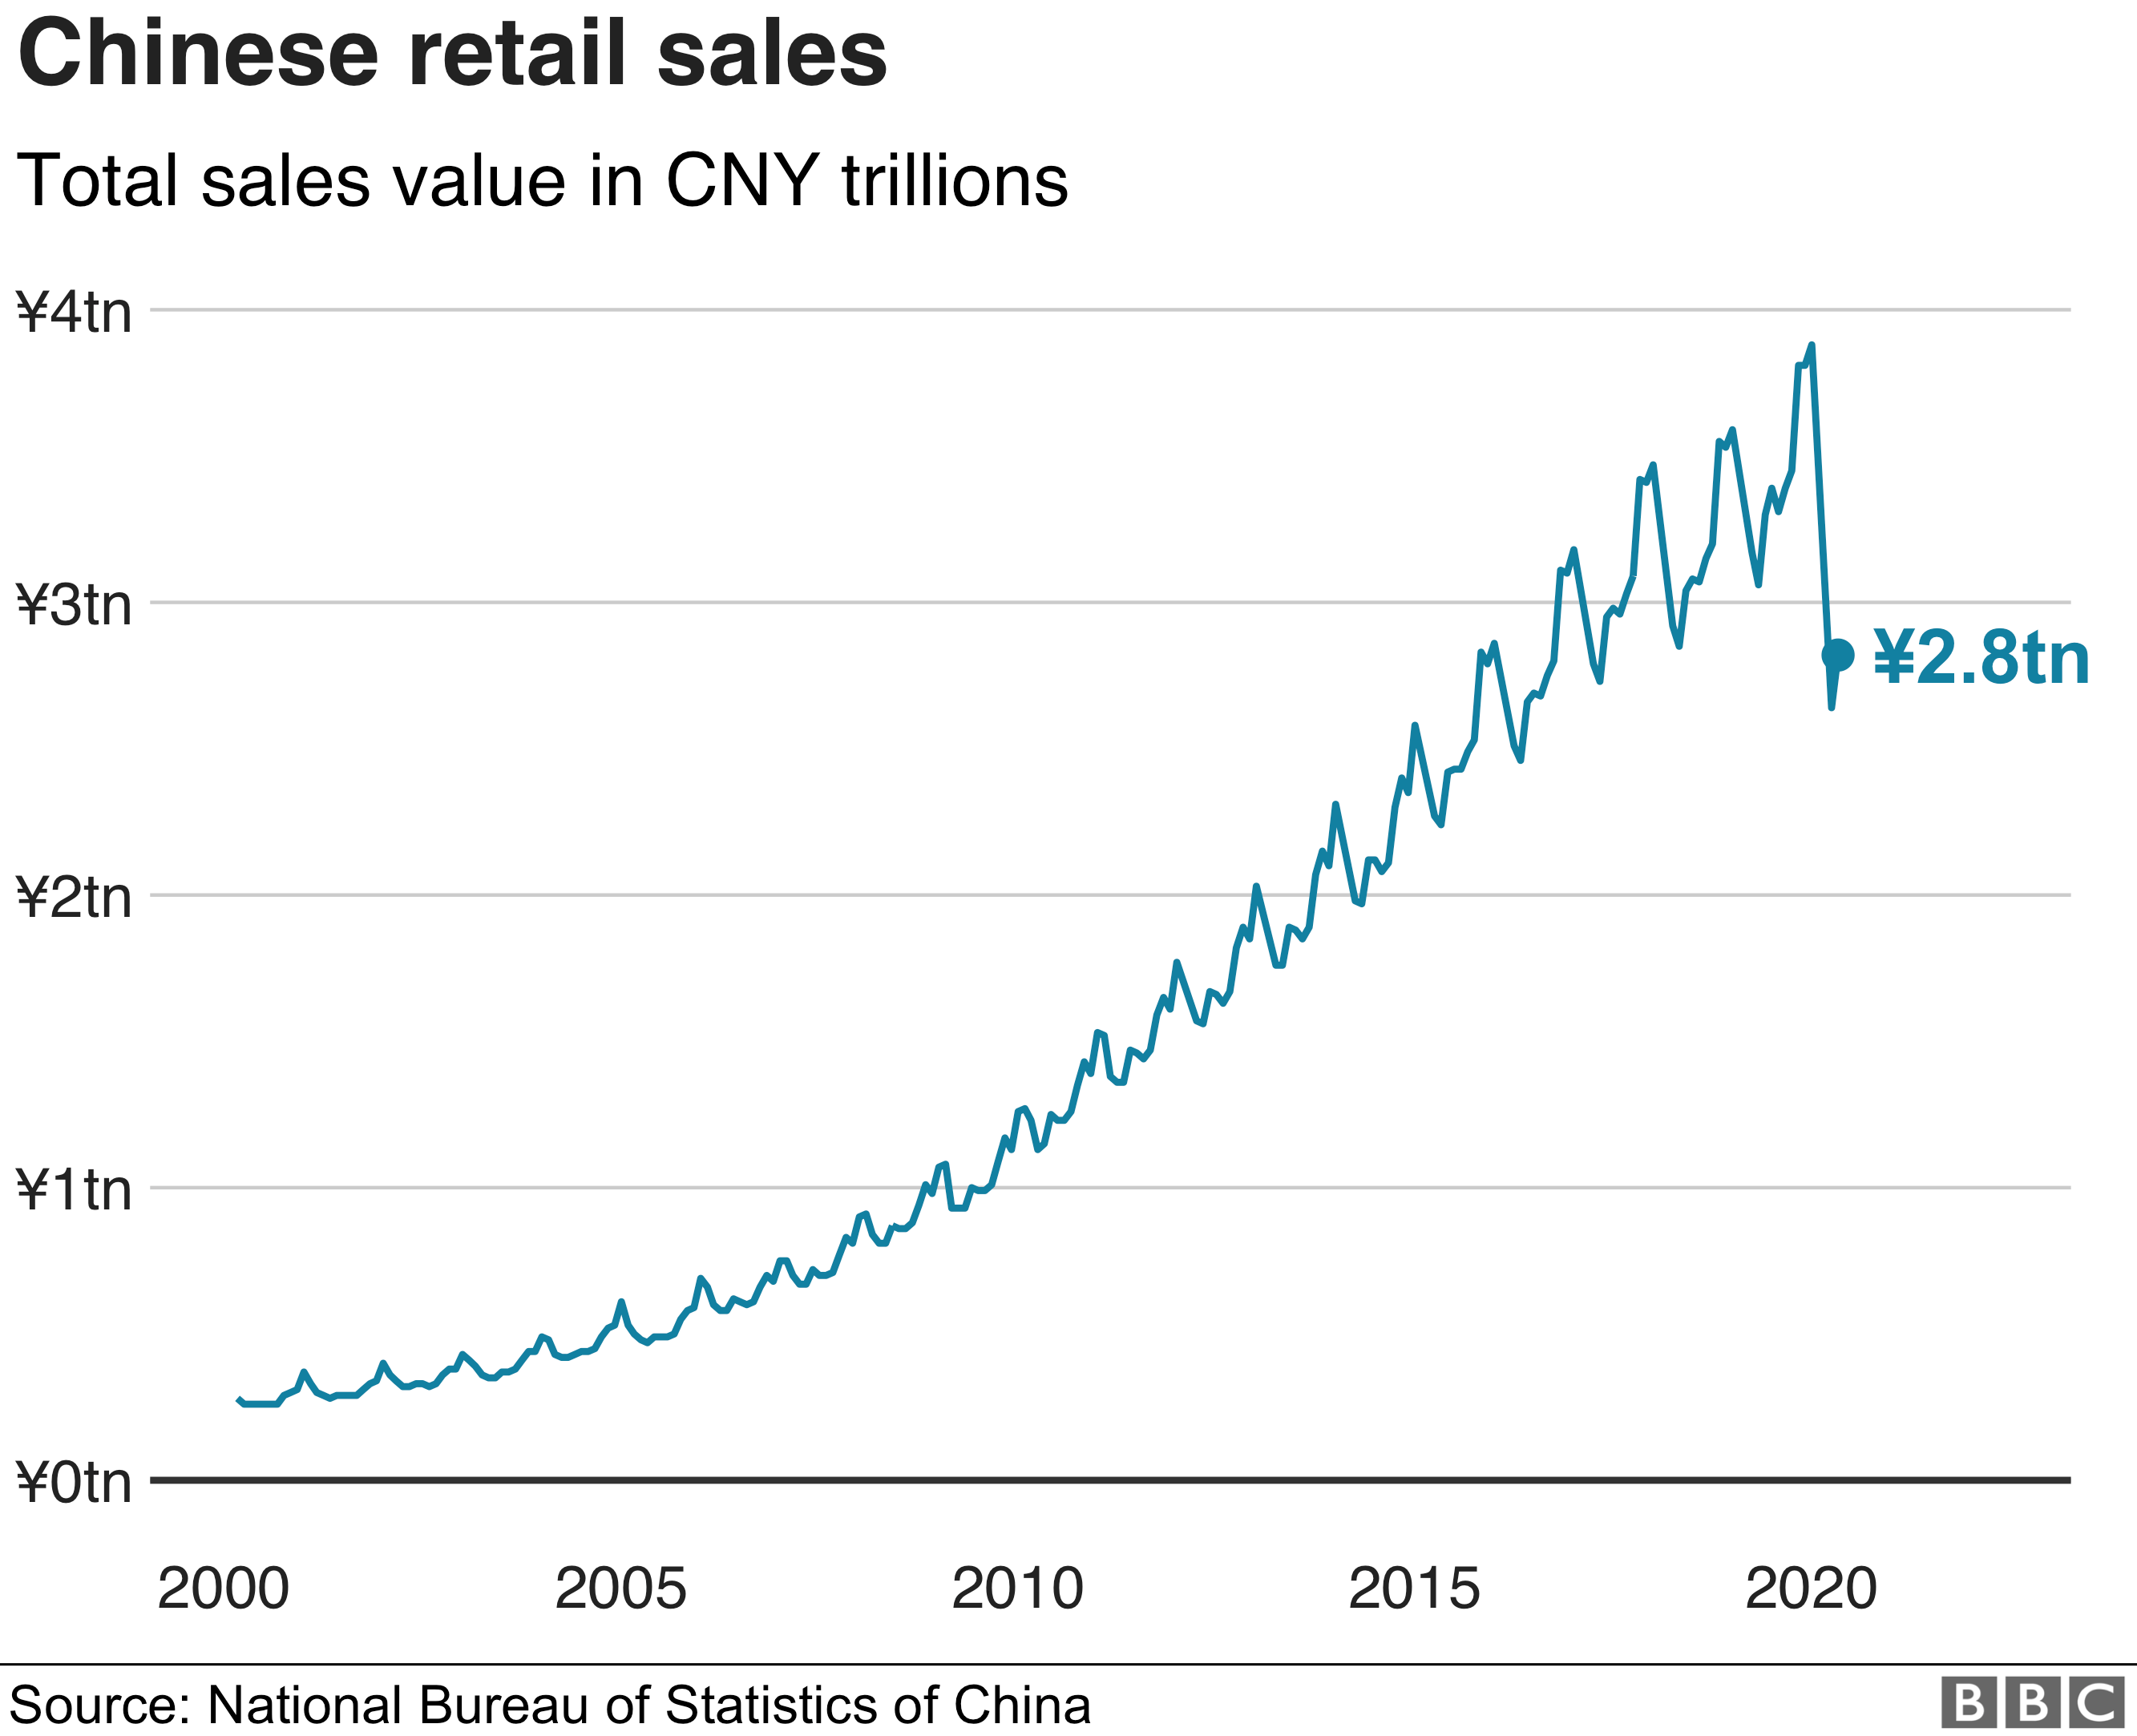 Chinese retail sales graph